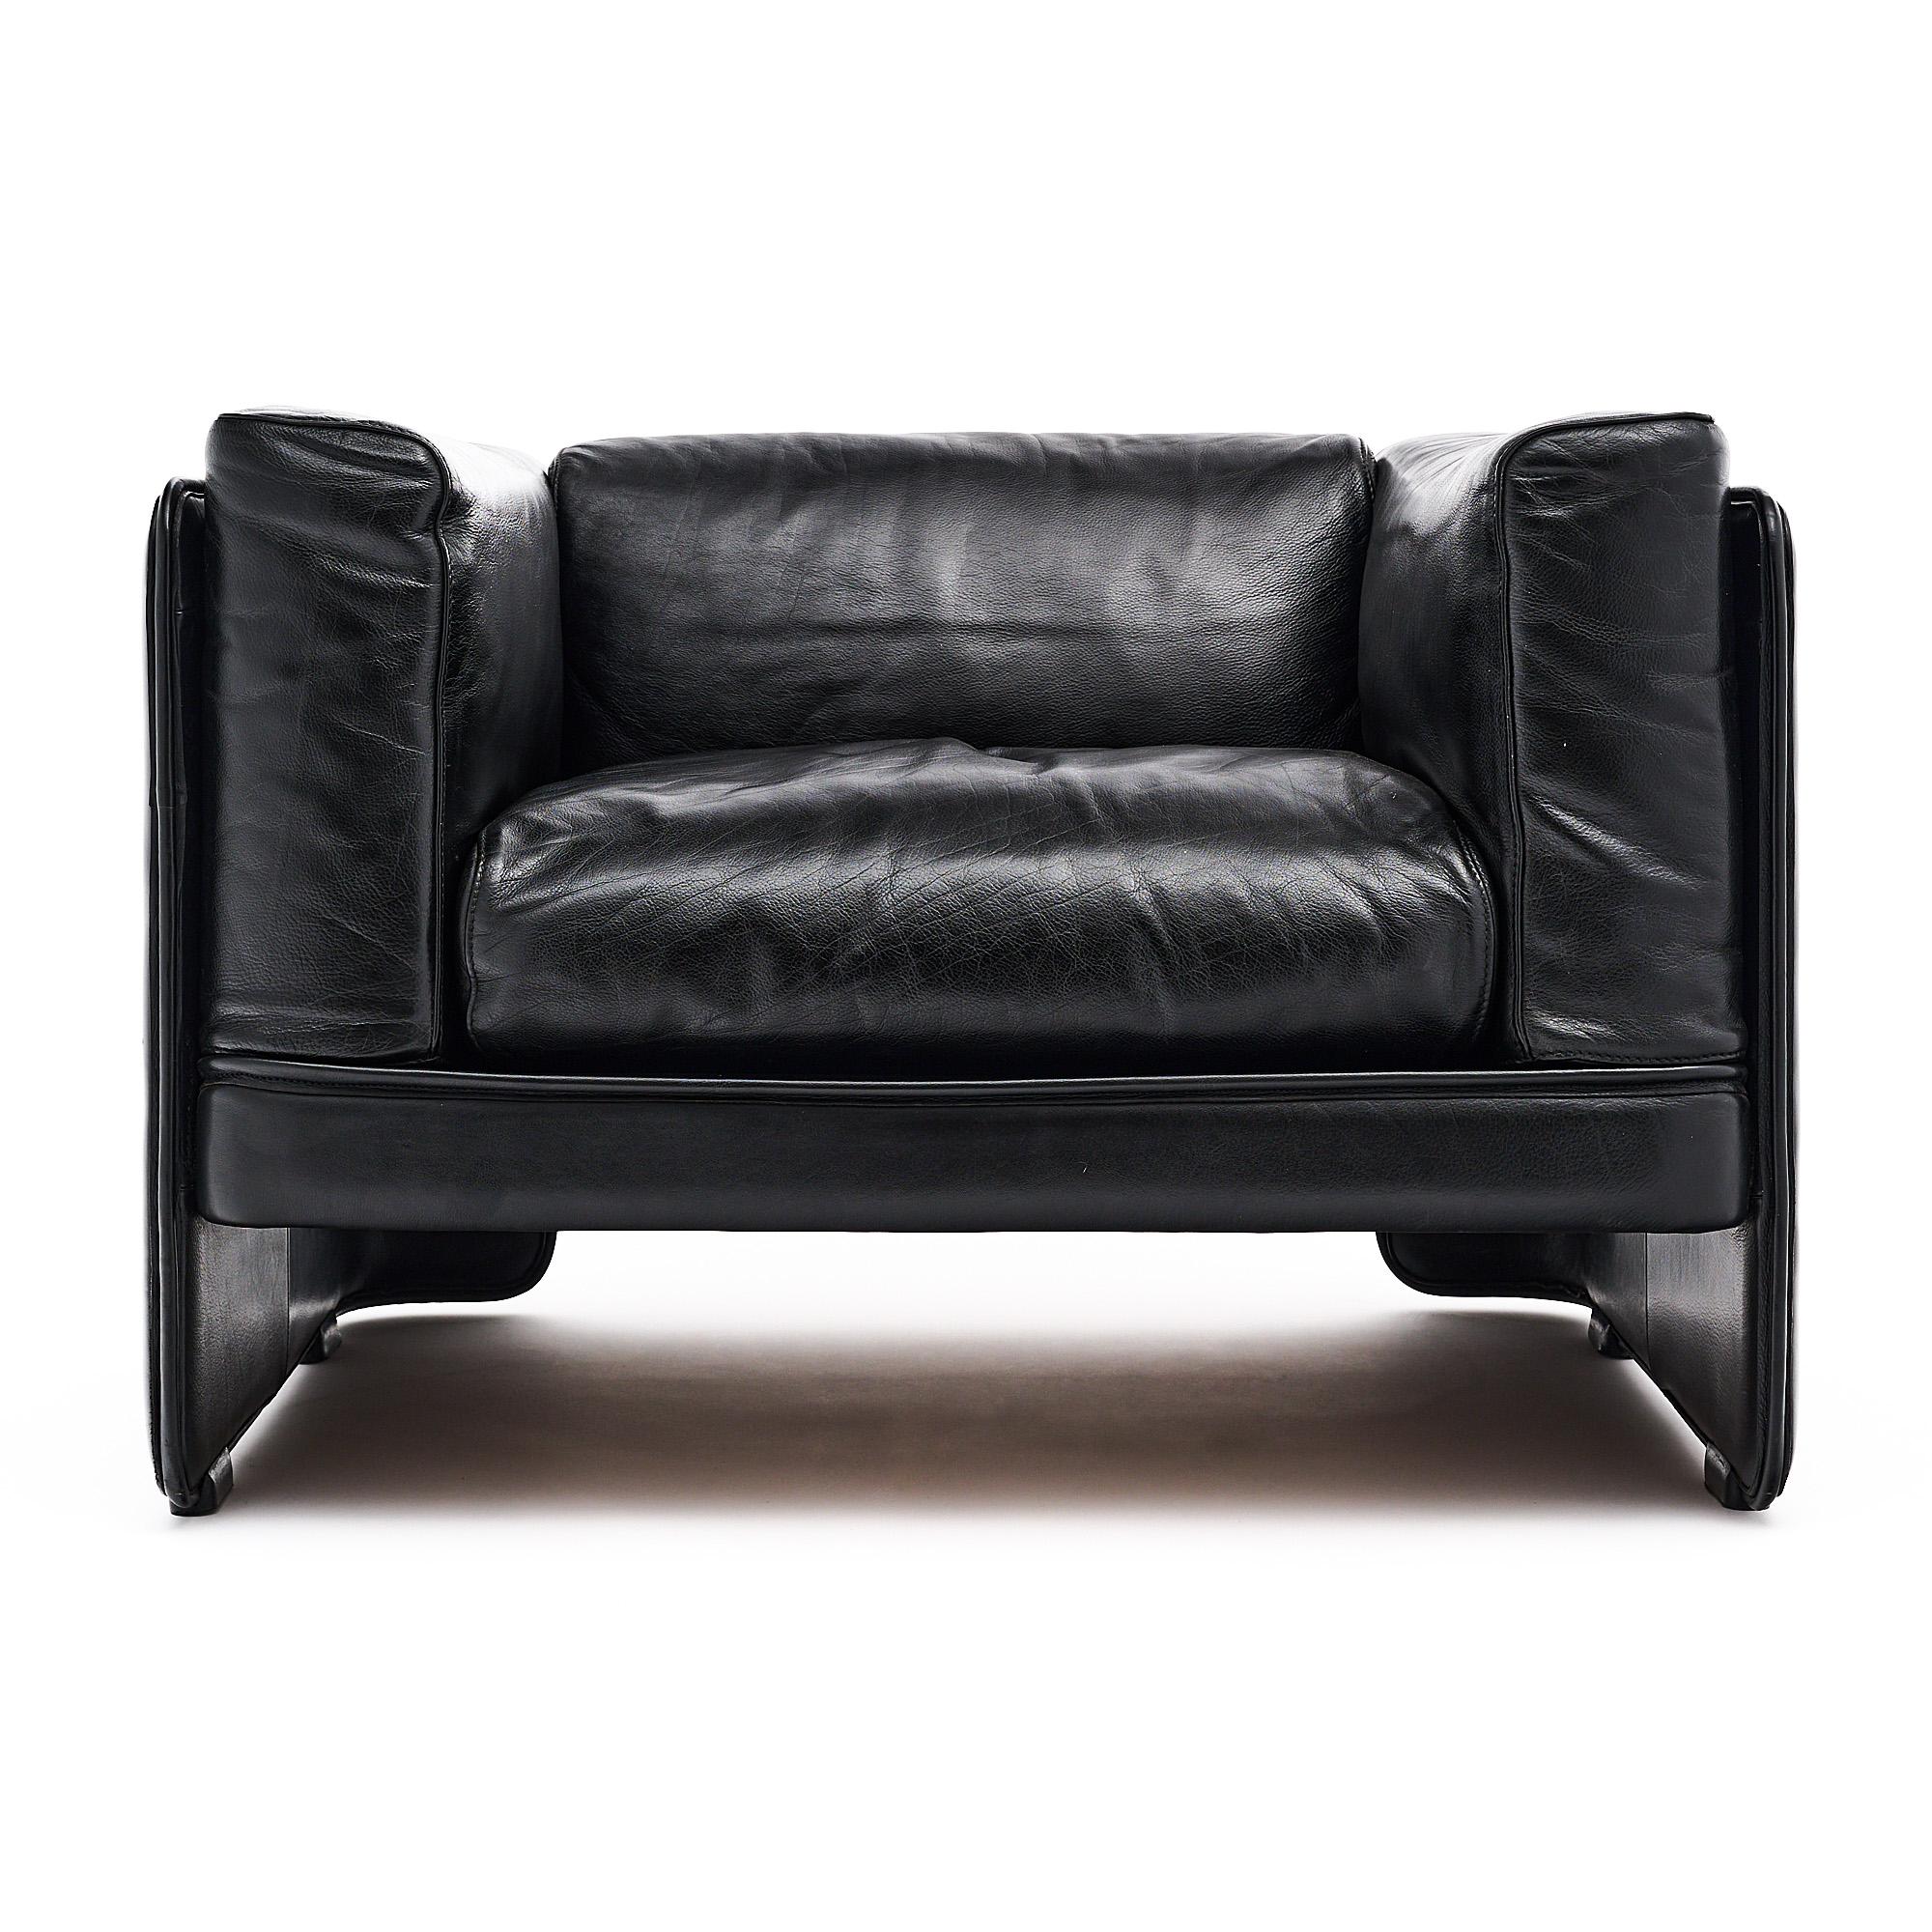 Leather armchair of black leather by Poltrona Frau.